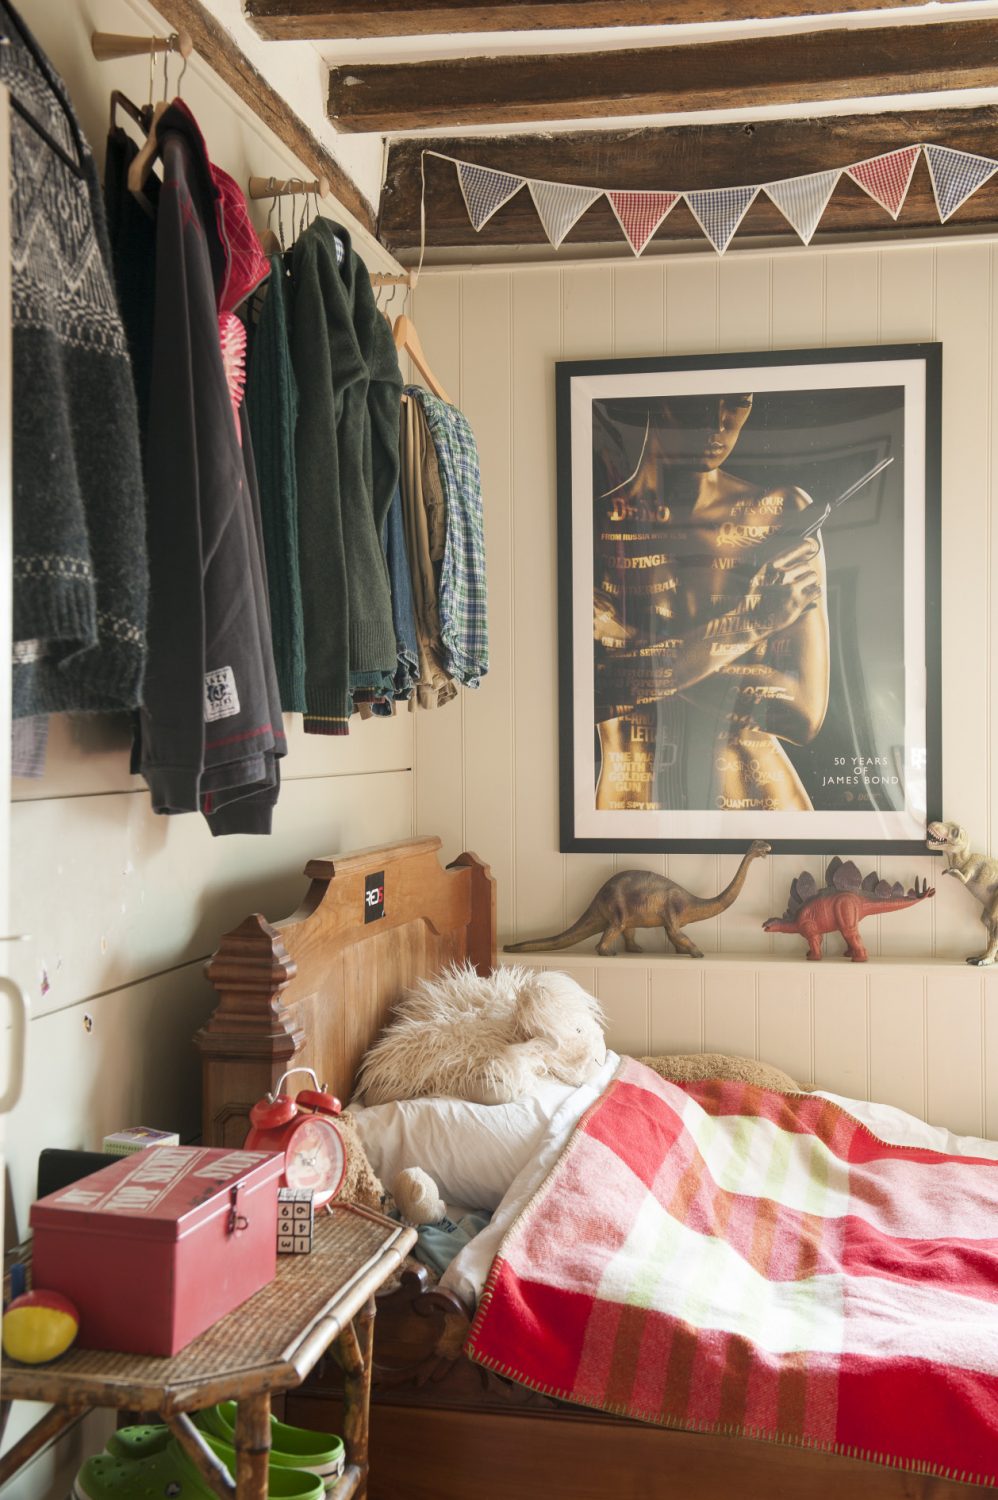 Ally has rationalised and organised each of her children’s rooms with her own distinctive design techniques – including more chalet-style horizontal boards and clever storage spaces – while allowing the children’s own taste and style to shine through